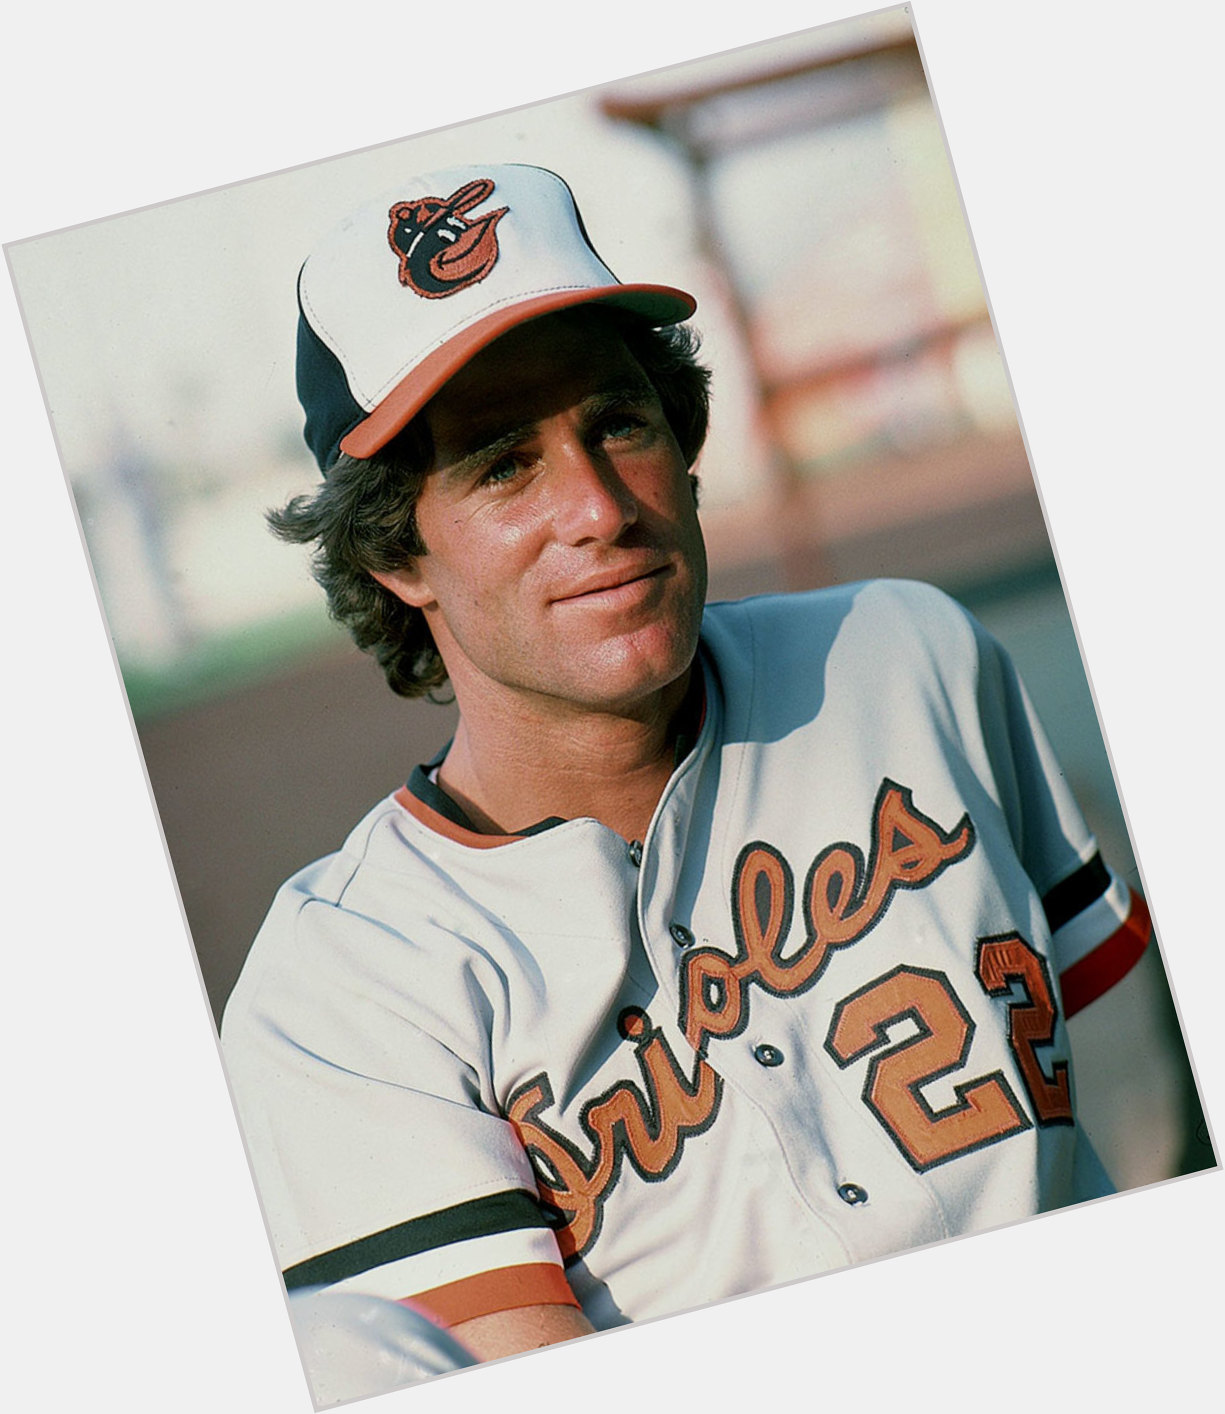 Happy 77th Birthday to Jim Palmer, pictured here with his uniform ON. 1975 